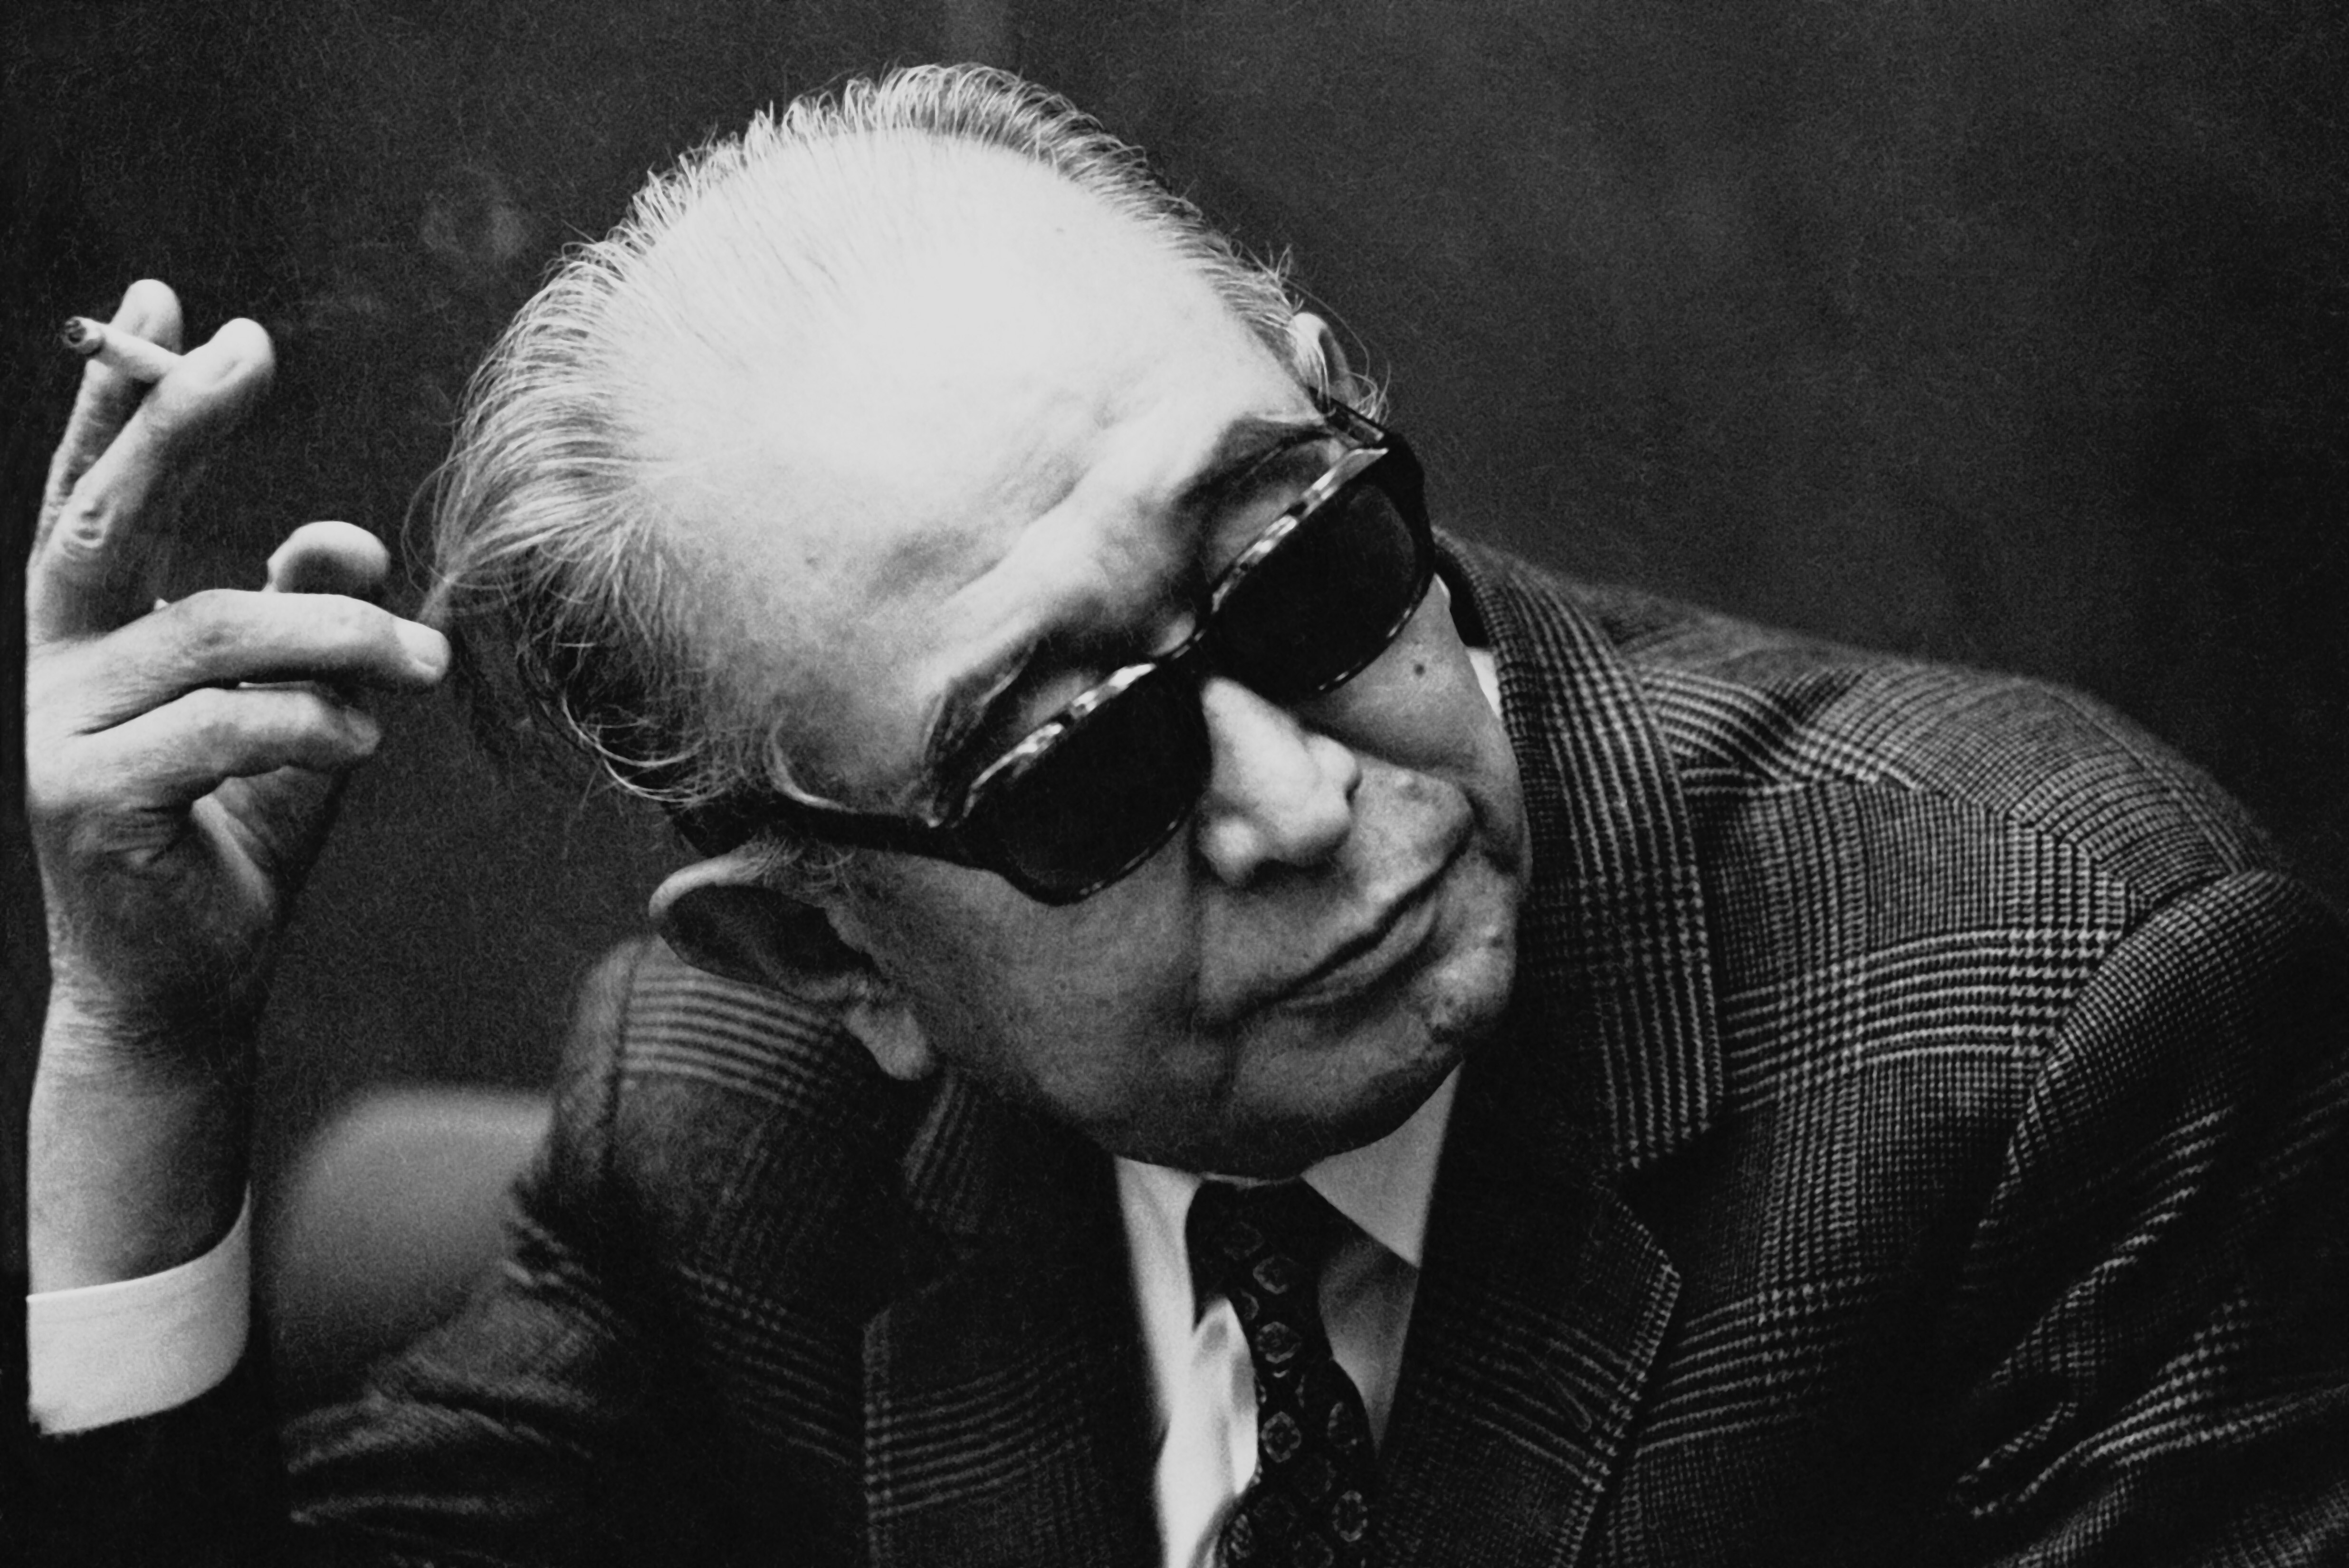 Akira Kurosawa was once considered Japan’s most famous film director. Photo: Getty Images